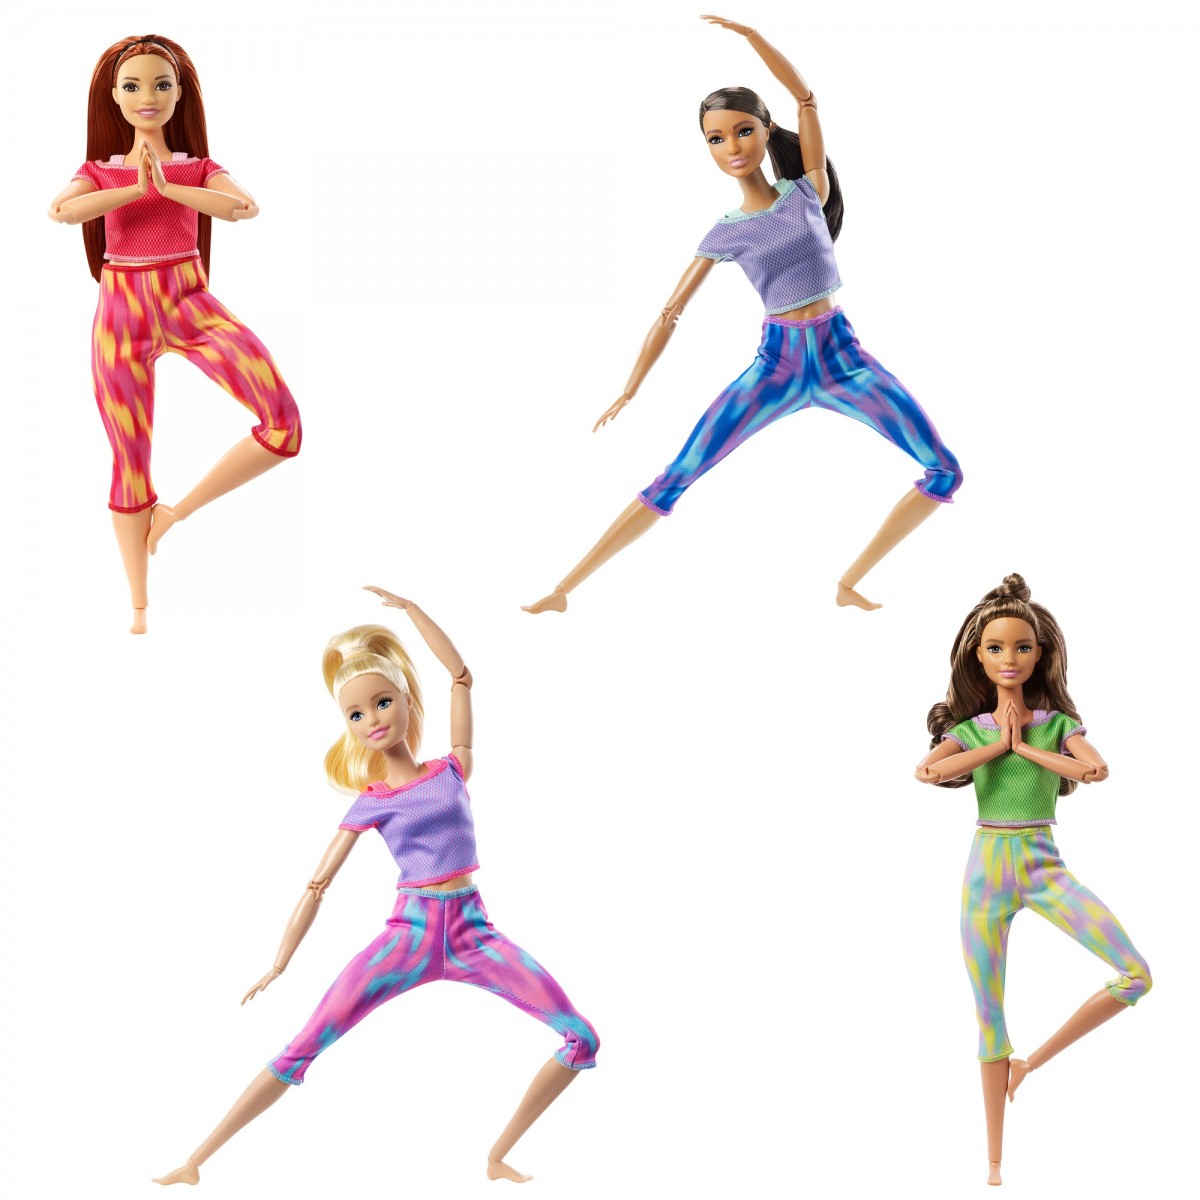 Barbie Made to Move, Yoga Barbie Dolls for Kids, Assorted, Set of